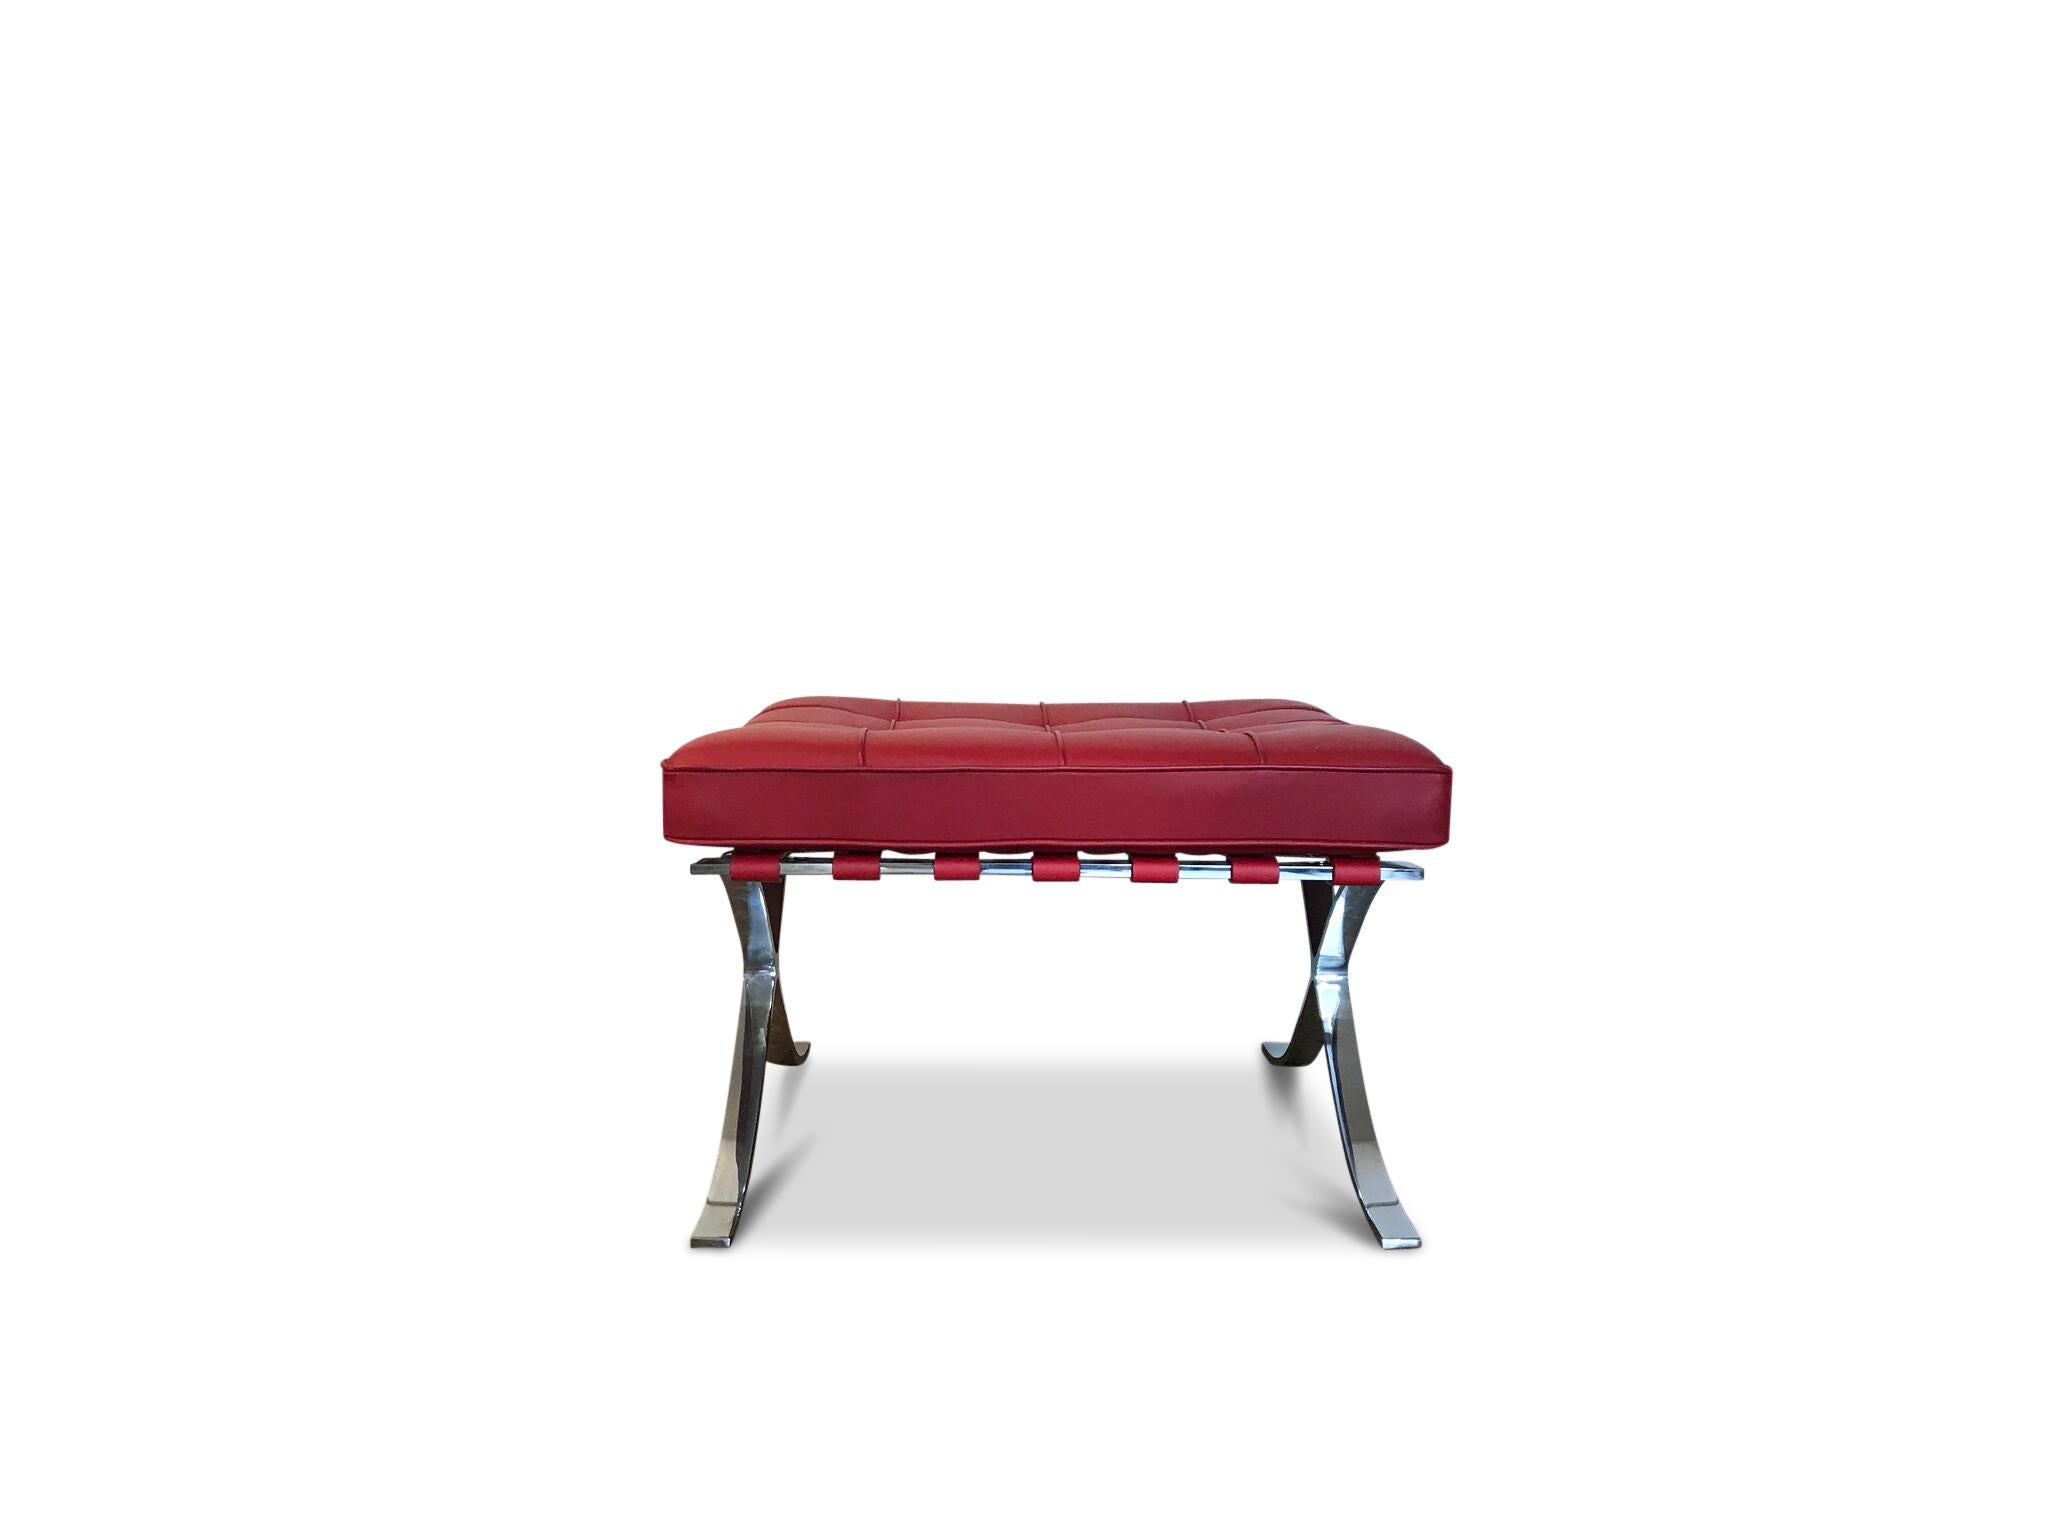 Barcelona ottoman by Knoll Studios in red leather.
Stamped 